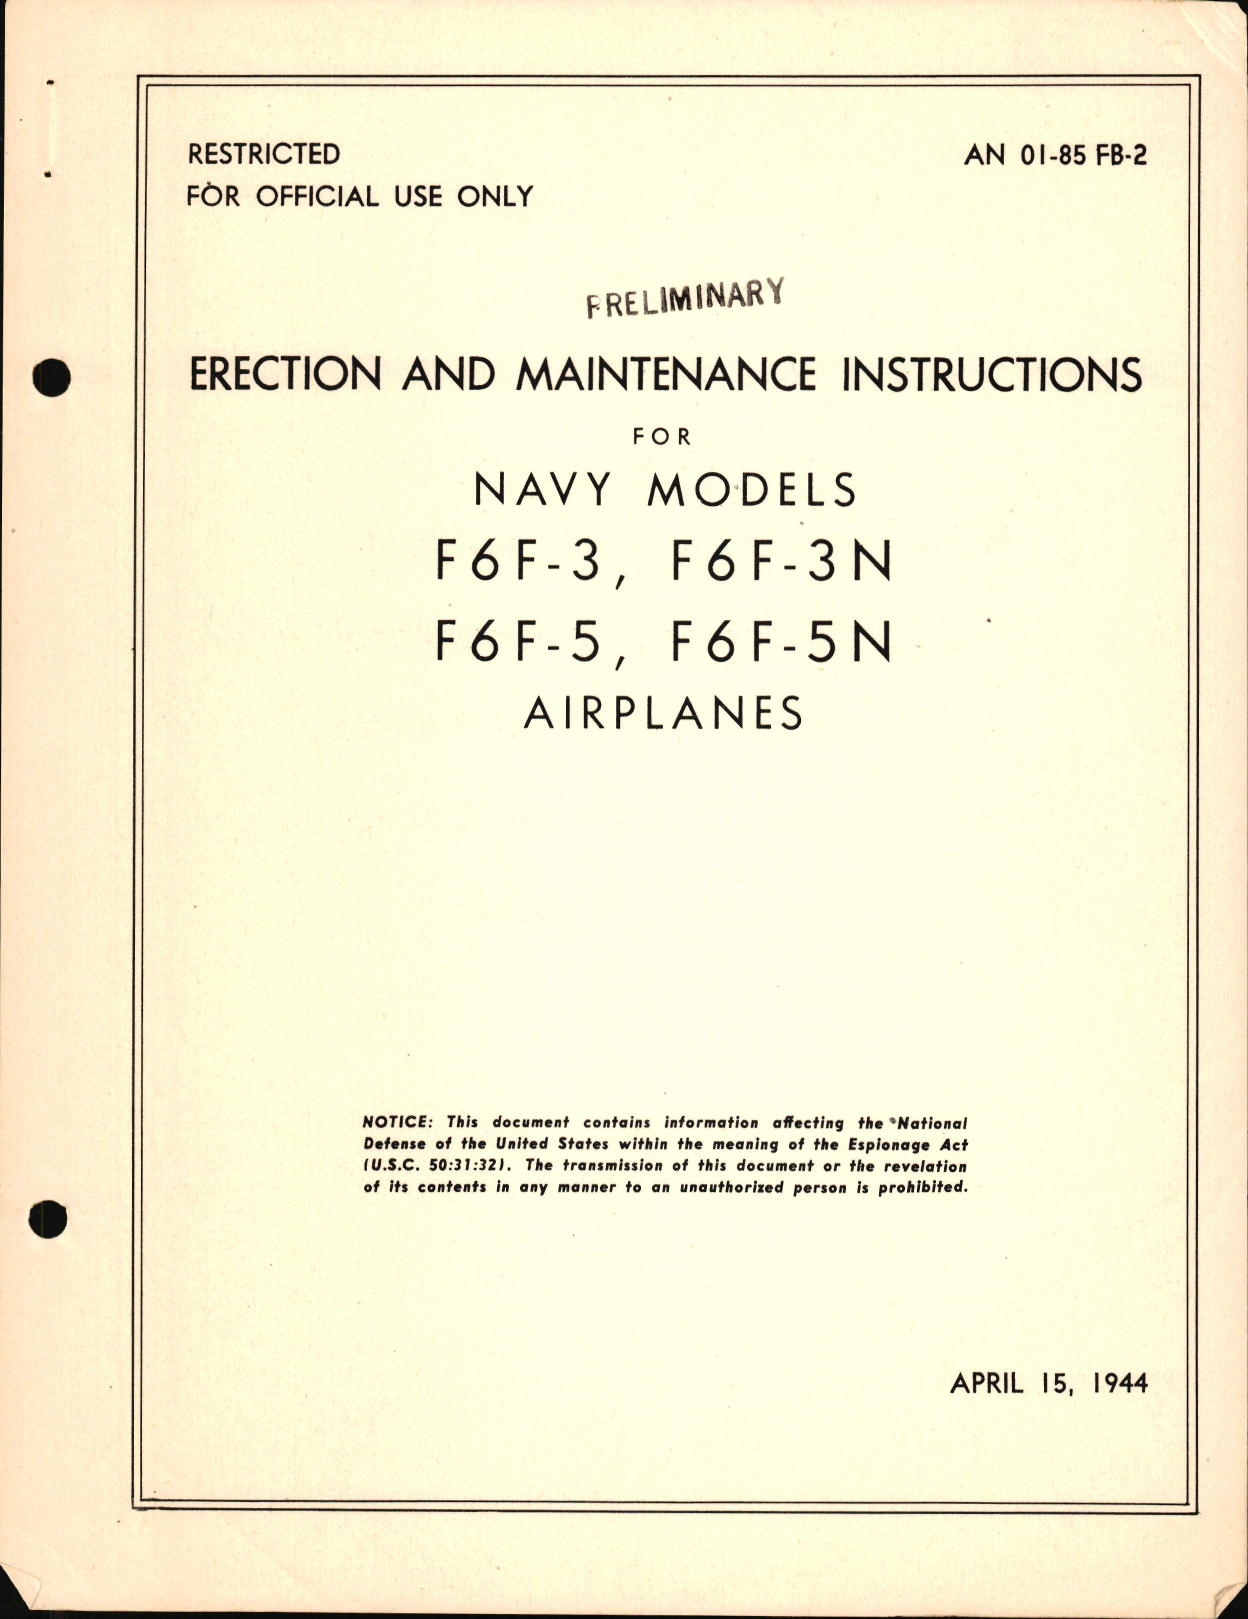 Sample page 5 from AirCorps Library document: Erection and Maintenance Instructions for F6F-3, F6F-3N, F6F-5, and F6F-5N